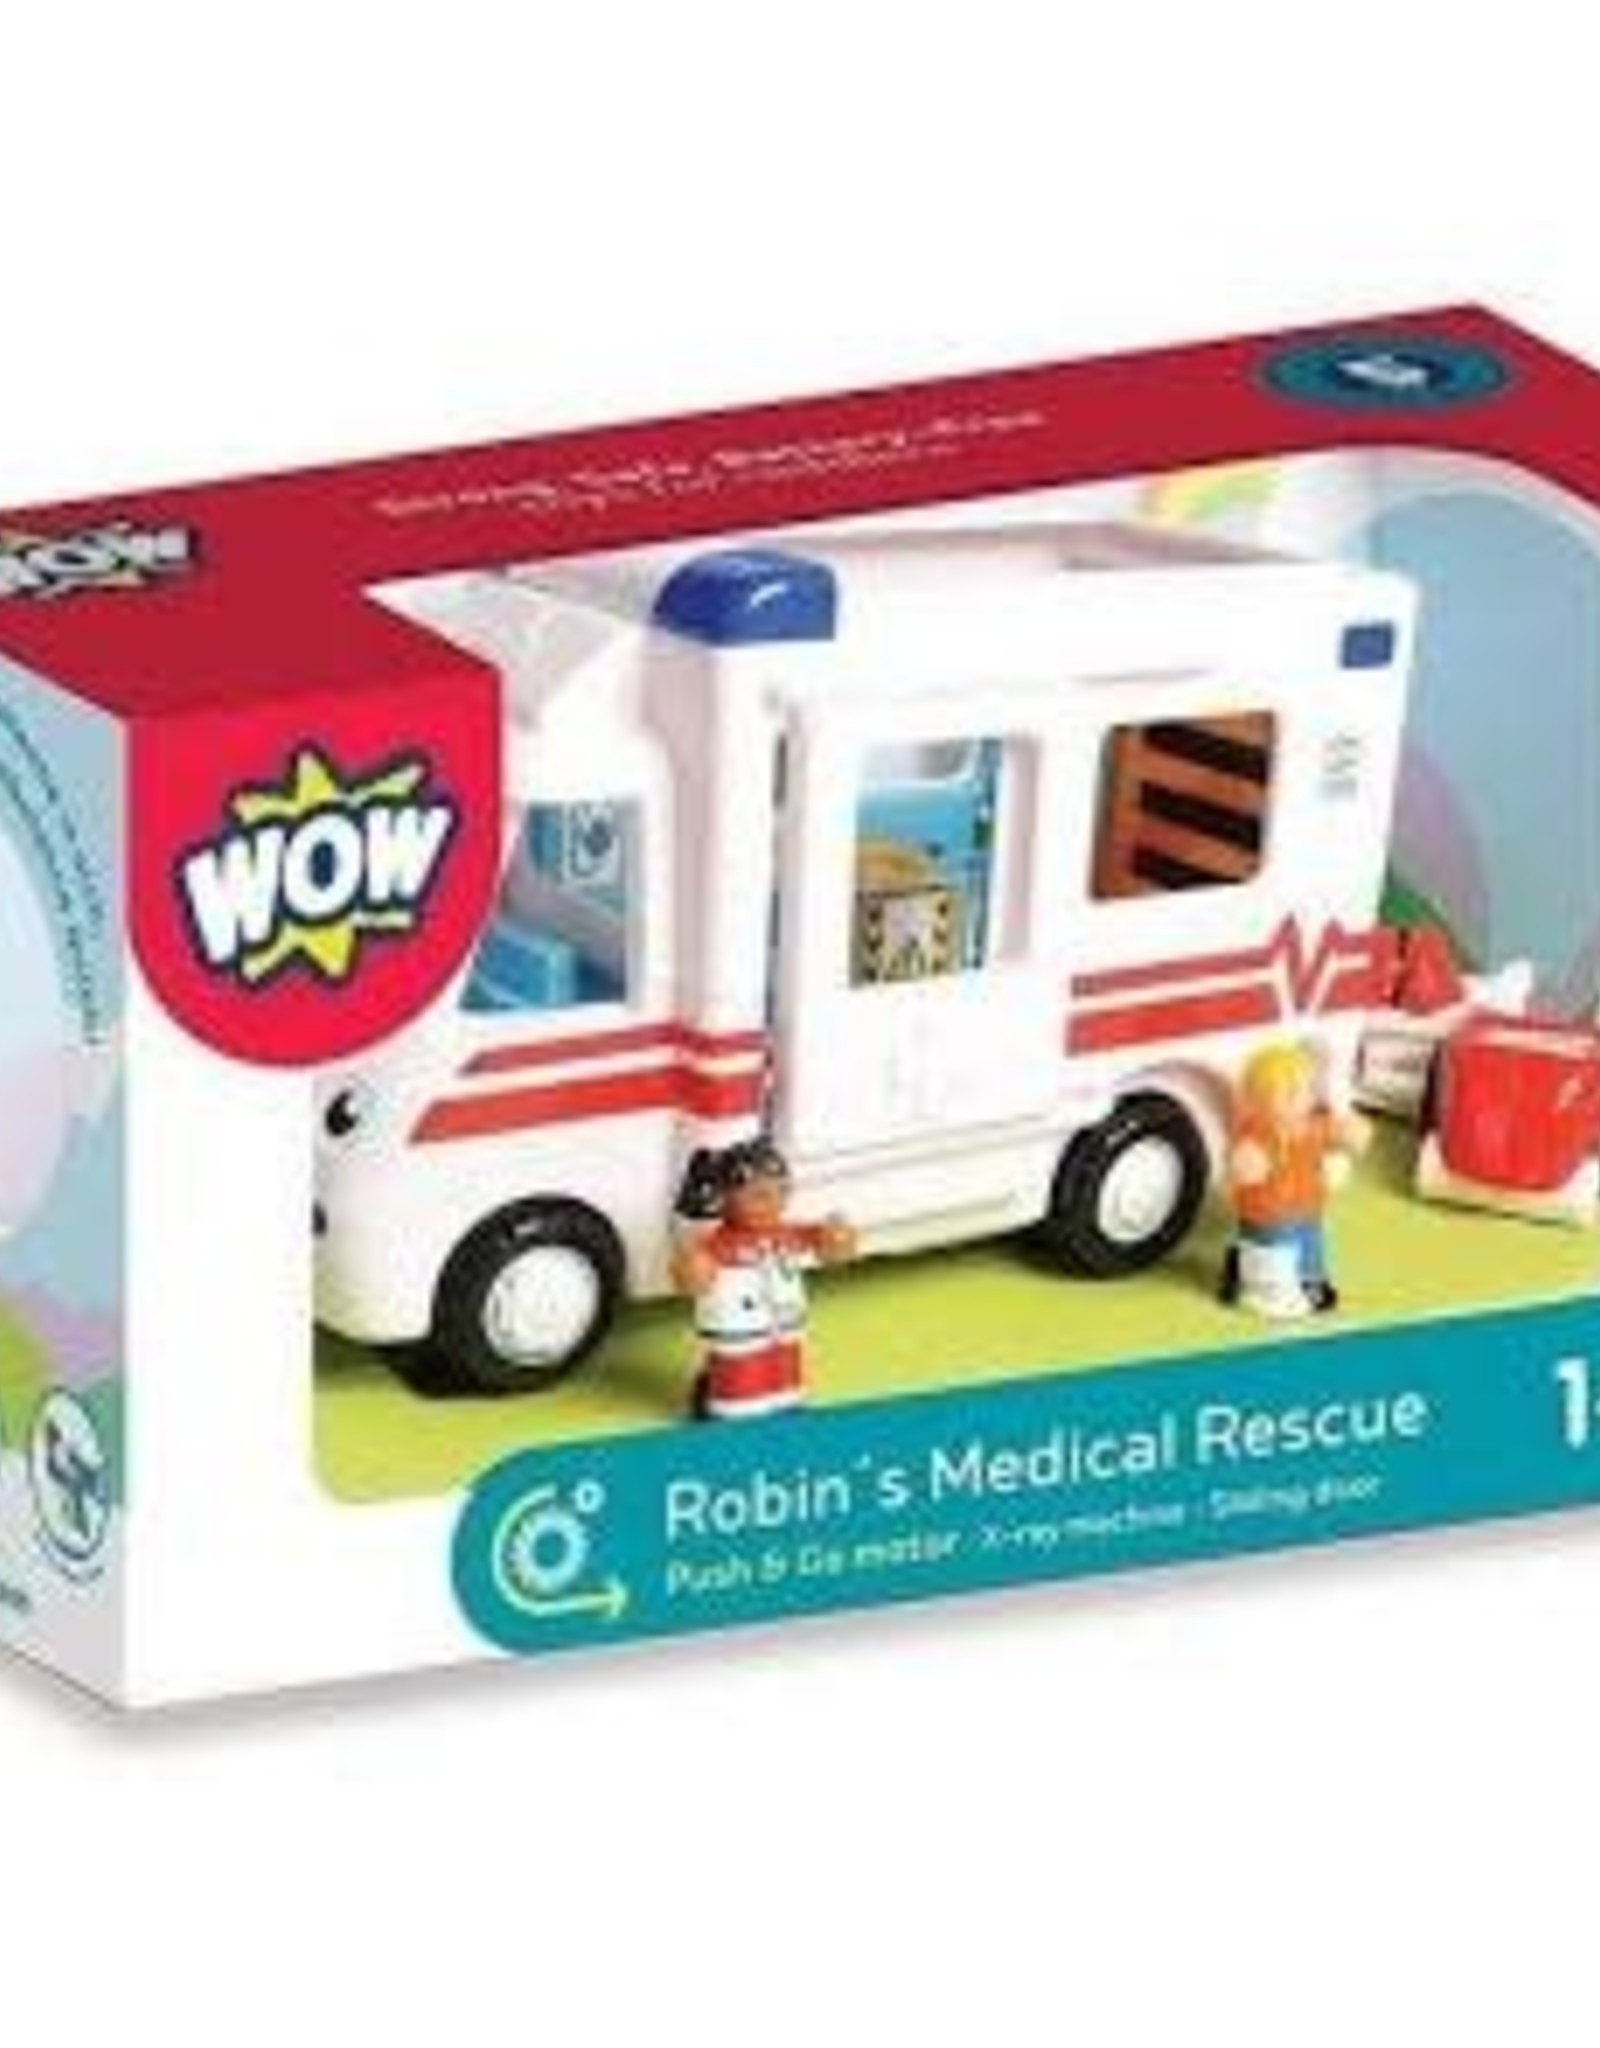 WOW Robin's Medical Rescue